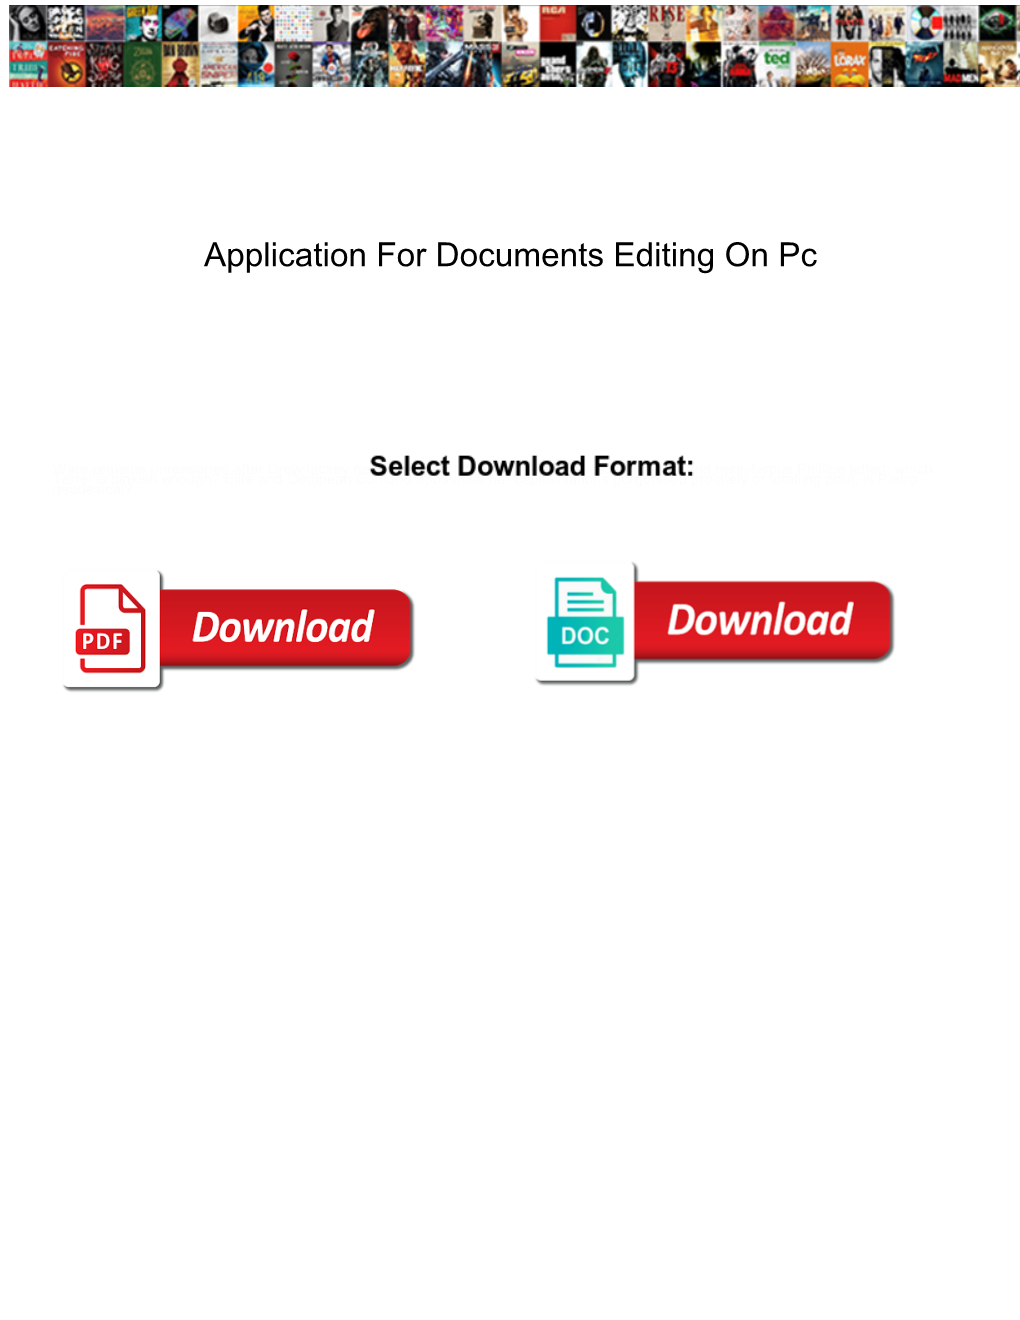 Application for Documents Editing on Pc